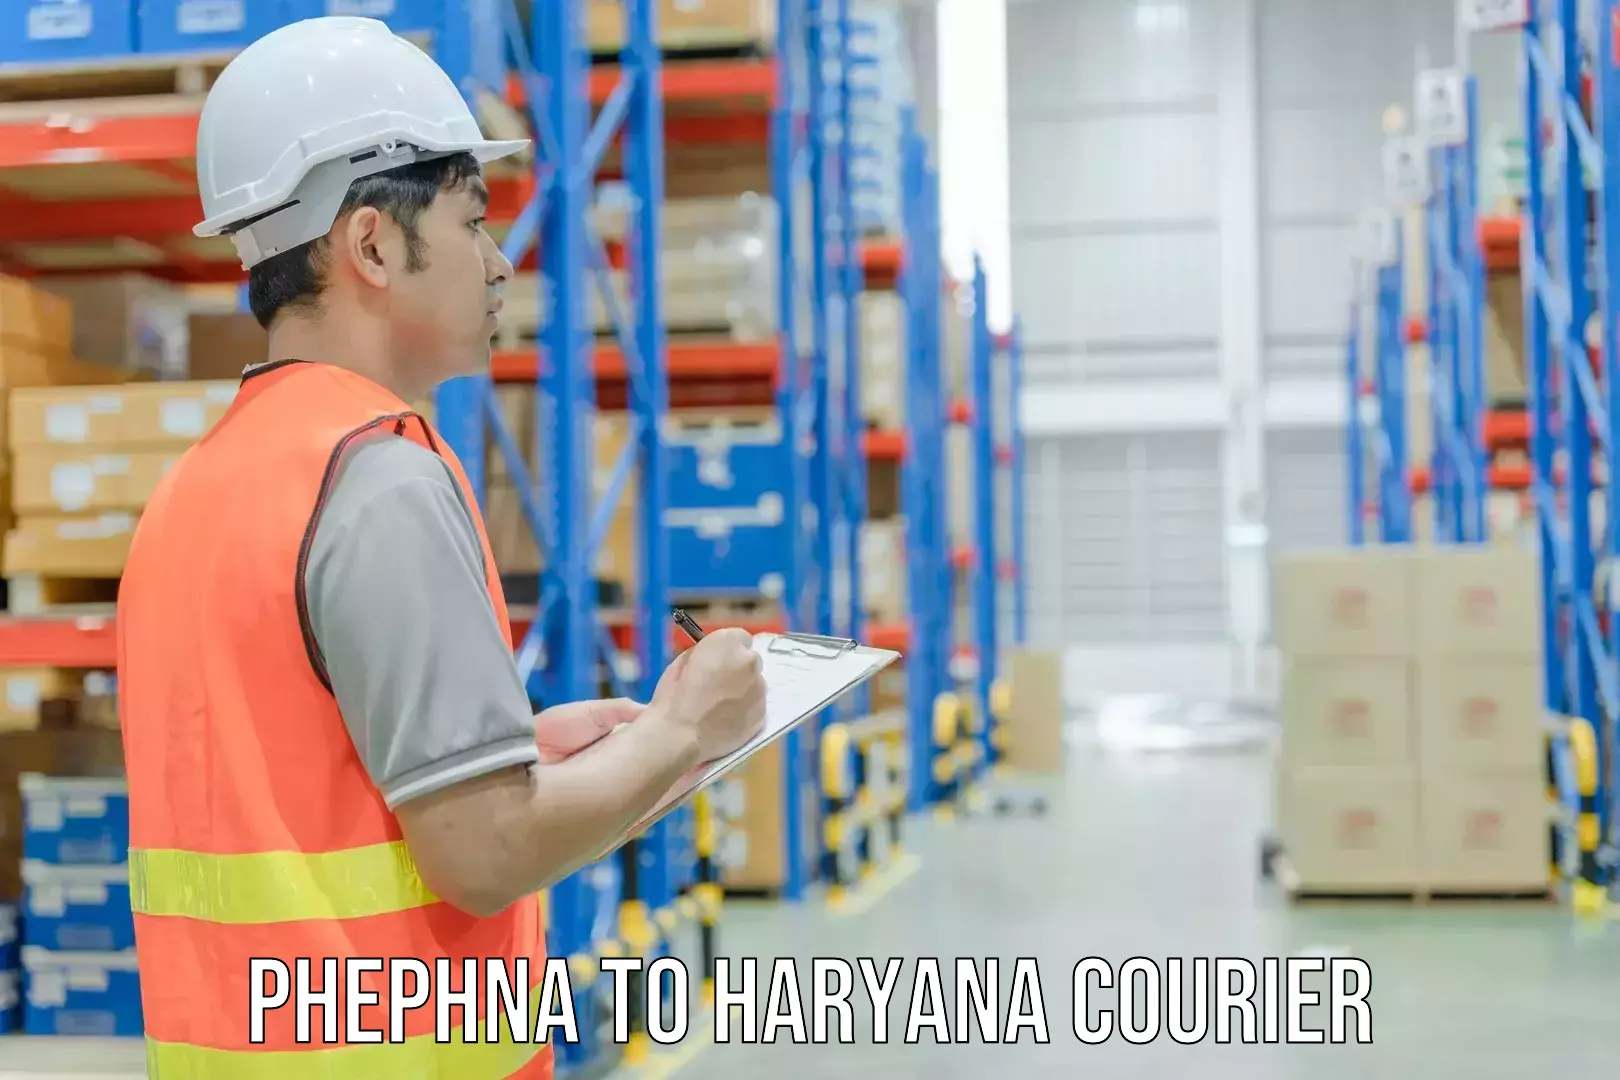 State-of-the-art courier technology Phephna to Odhan